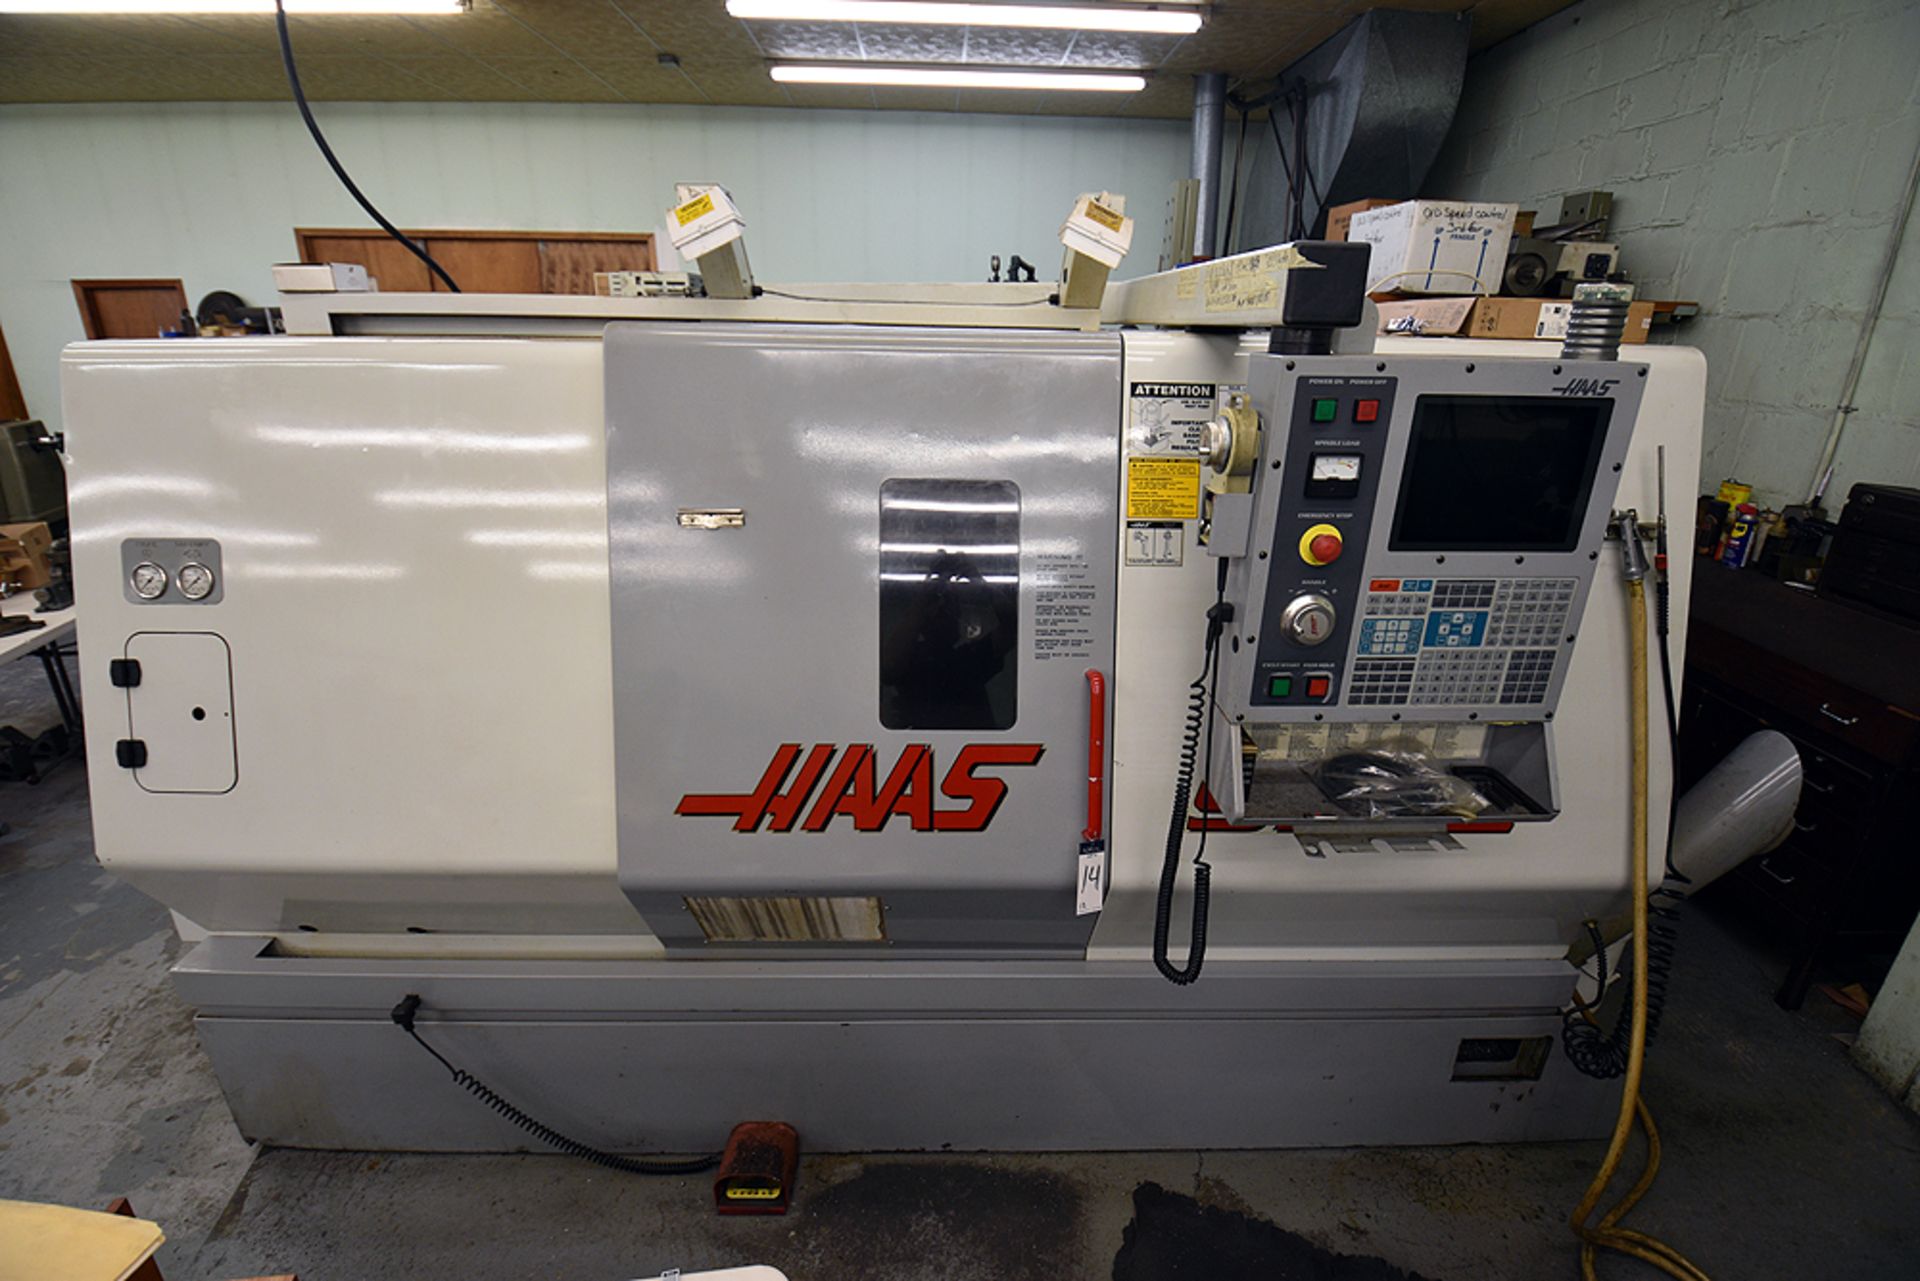 2002 Haas SL30T CNC Lathe Serial Number: 65057, 208v/230v, 3-Phase w/Rexroth Hydraulic Power Unit - Image 2 of 23